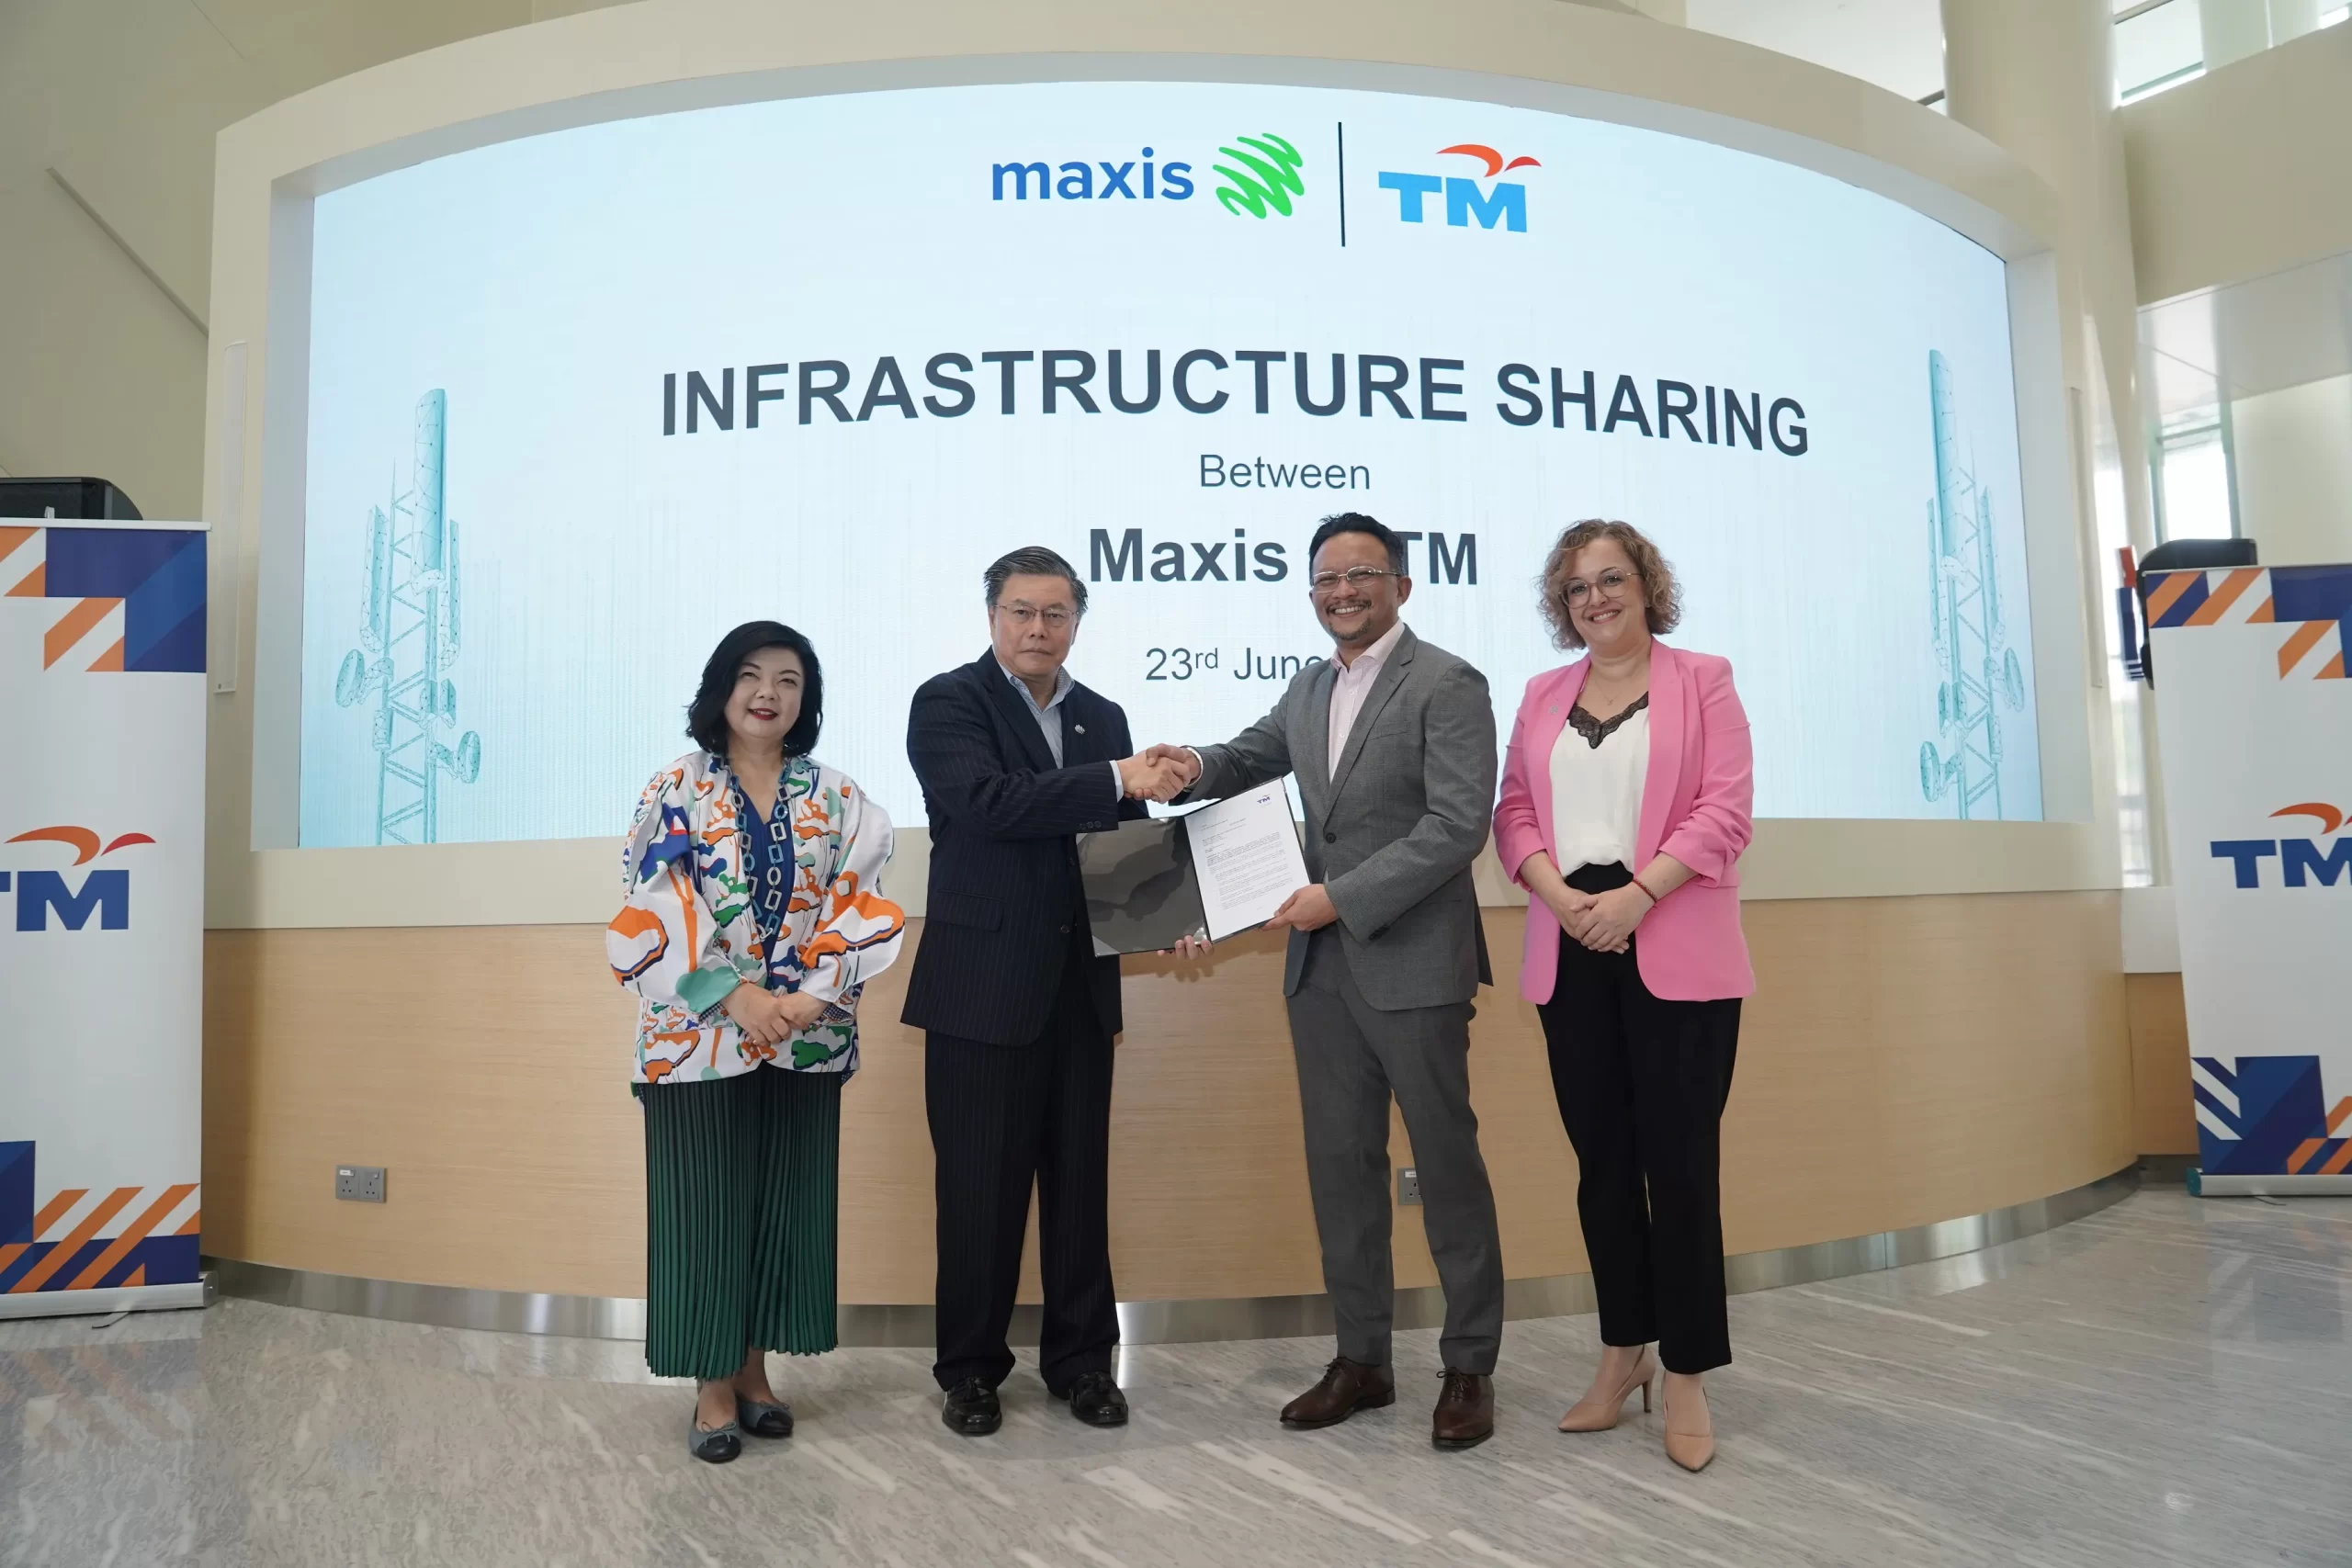 maxis tm infrastructure sharing scaled